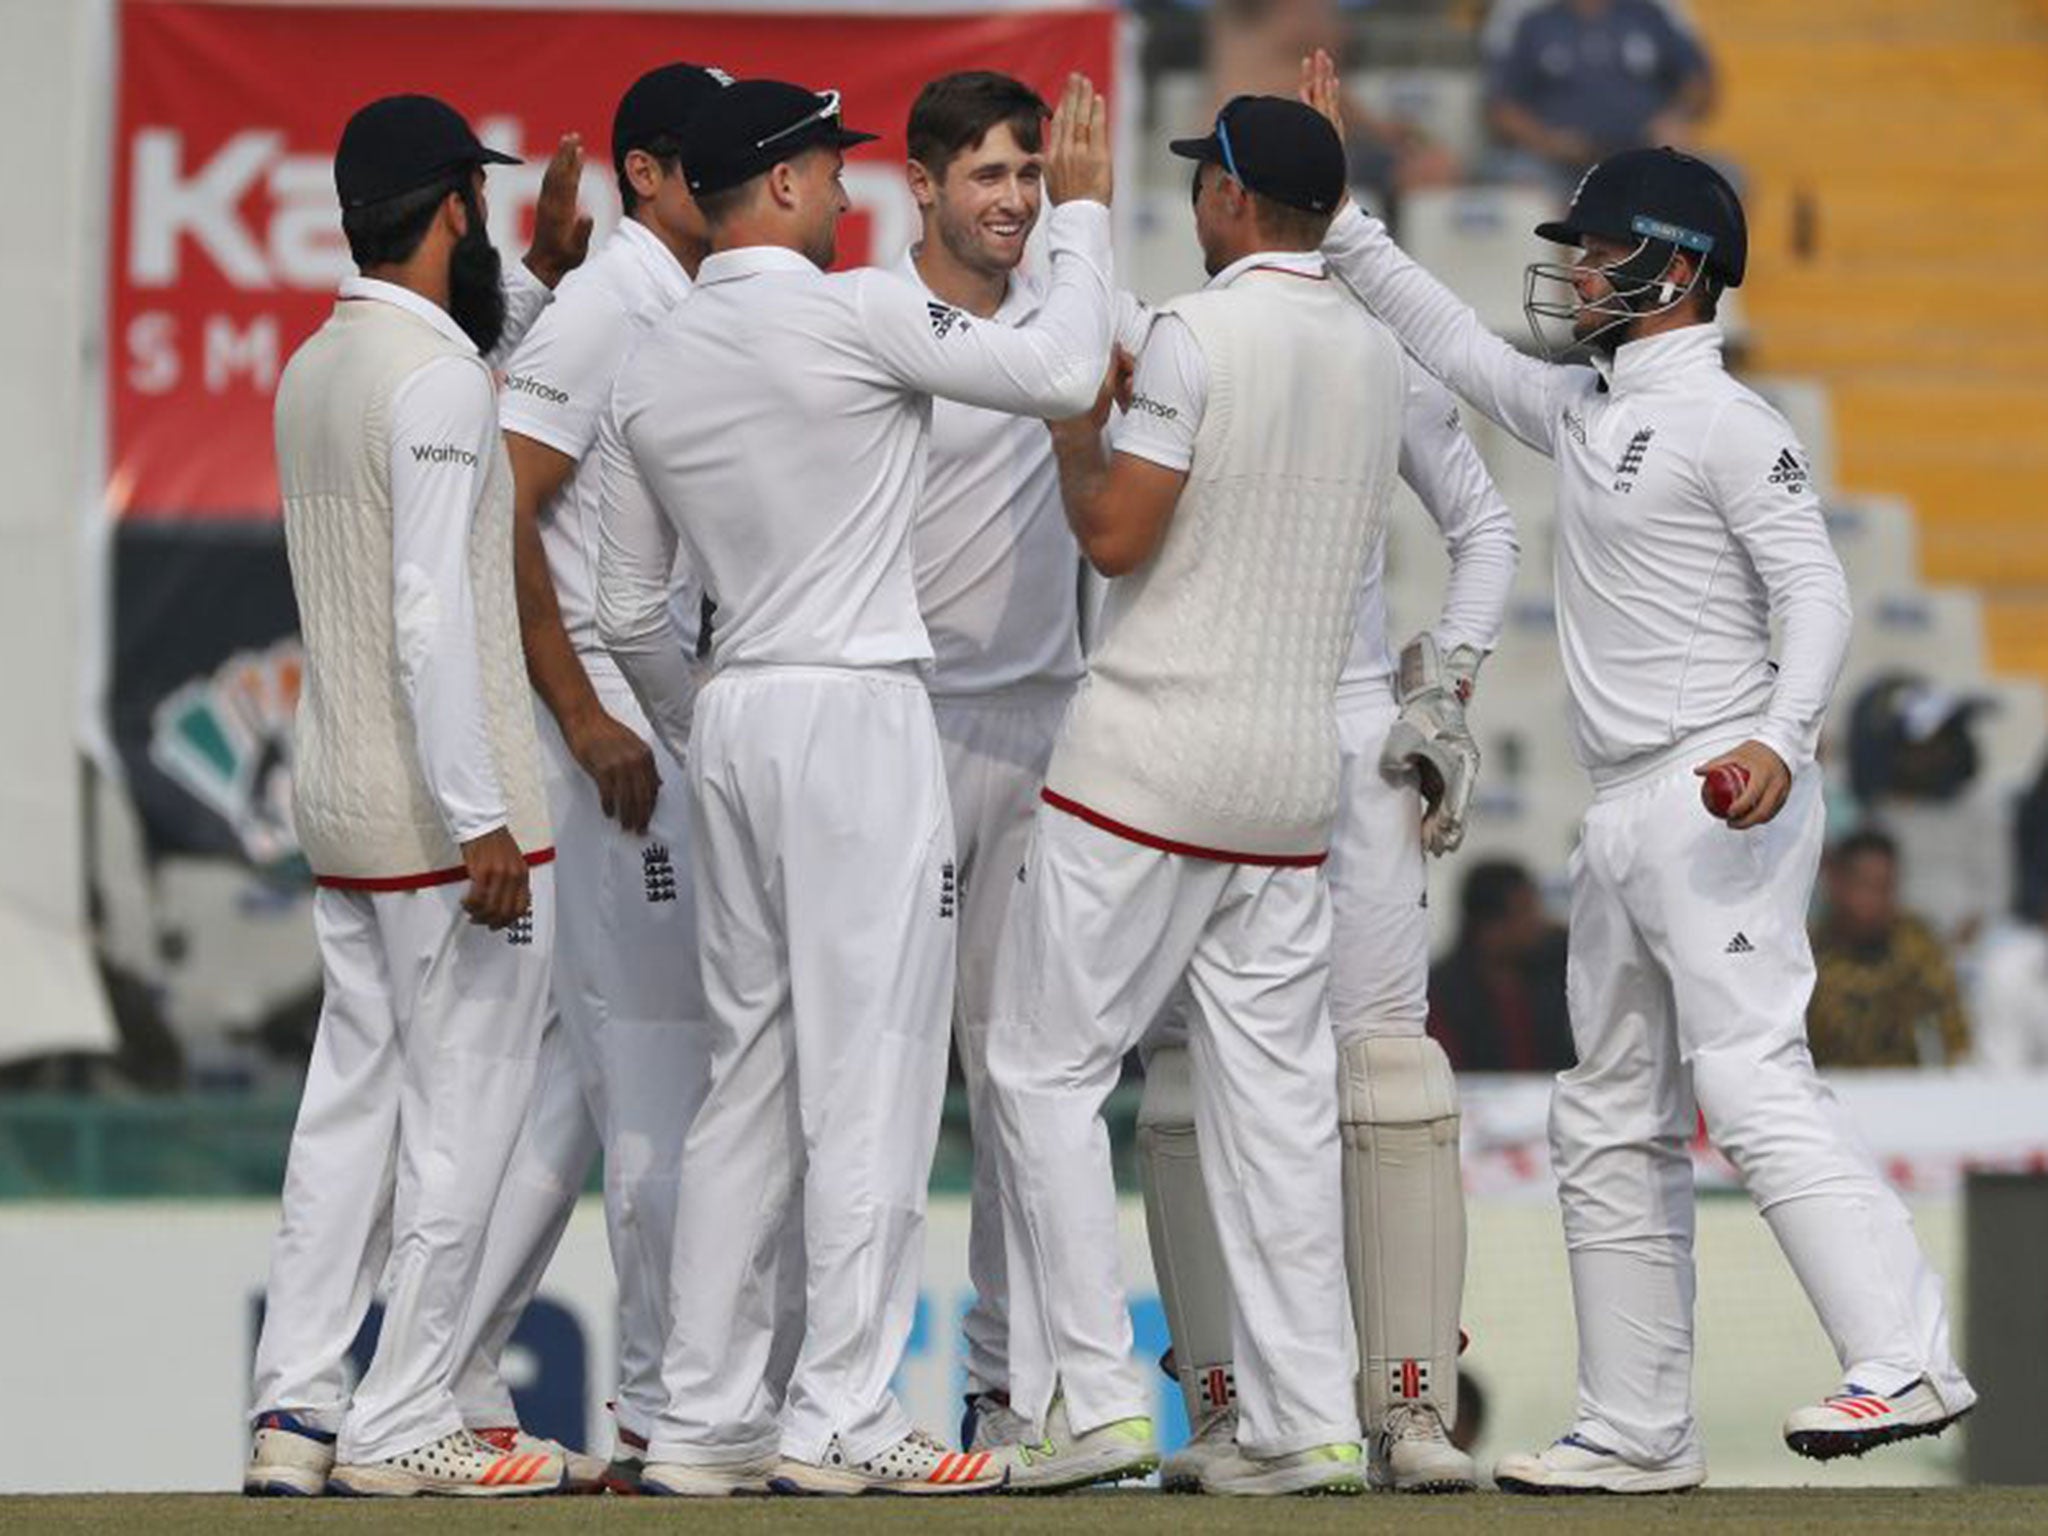 Chris Woakes struck in his first over to dismiss Murali Viya and give England hope